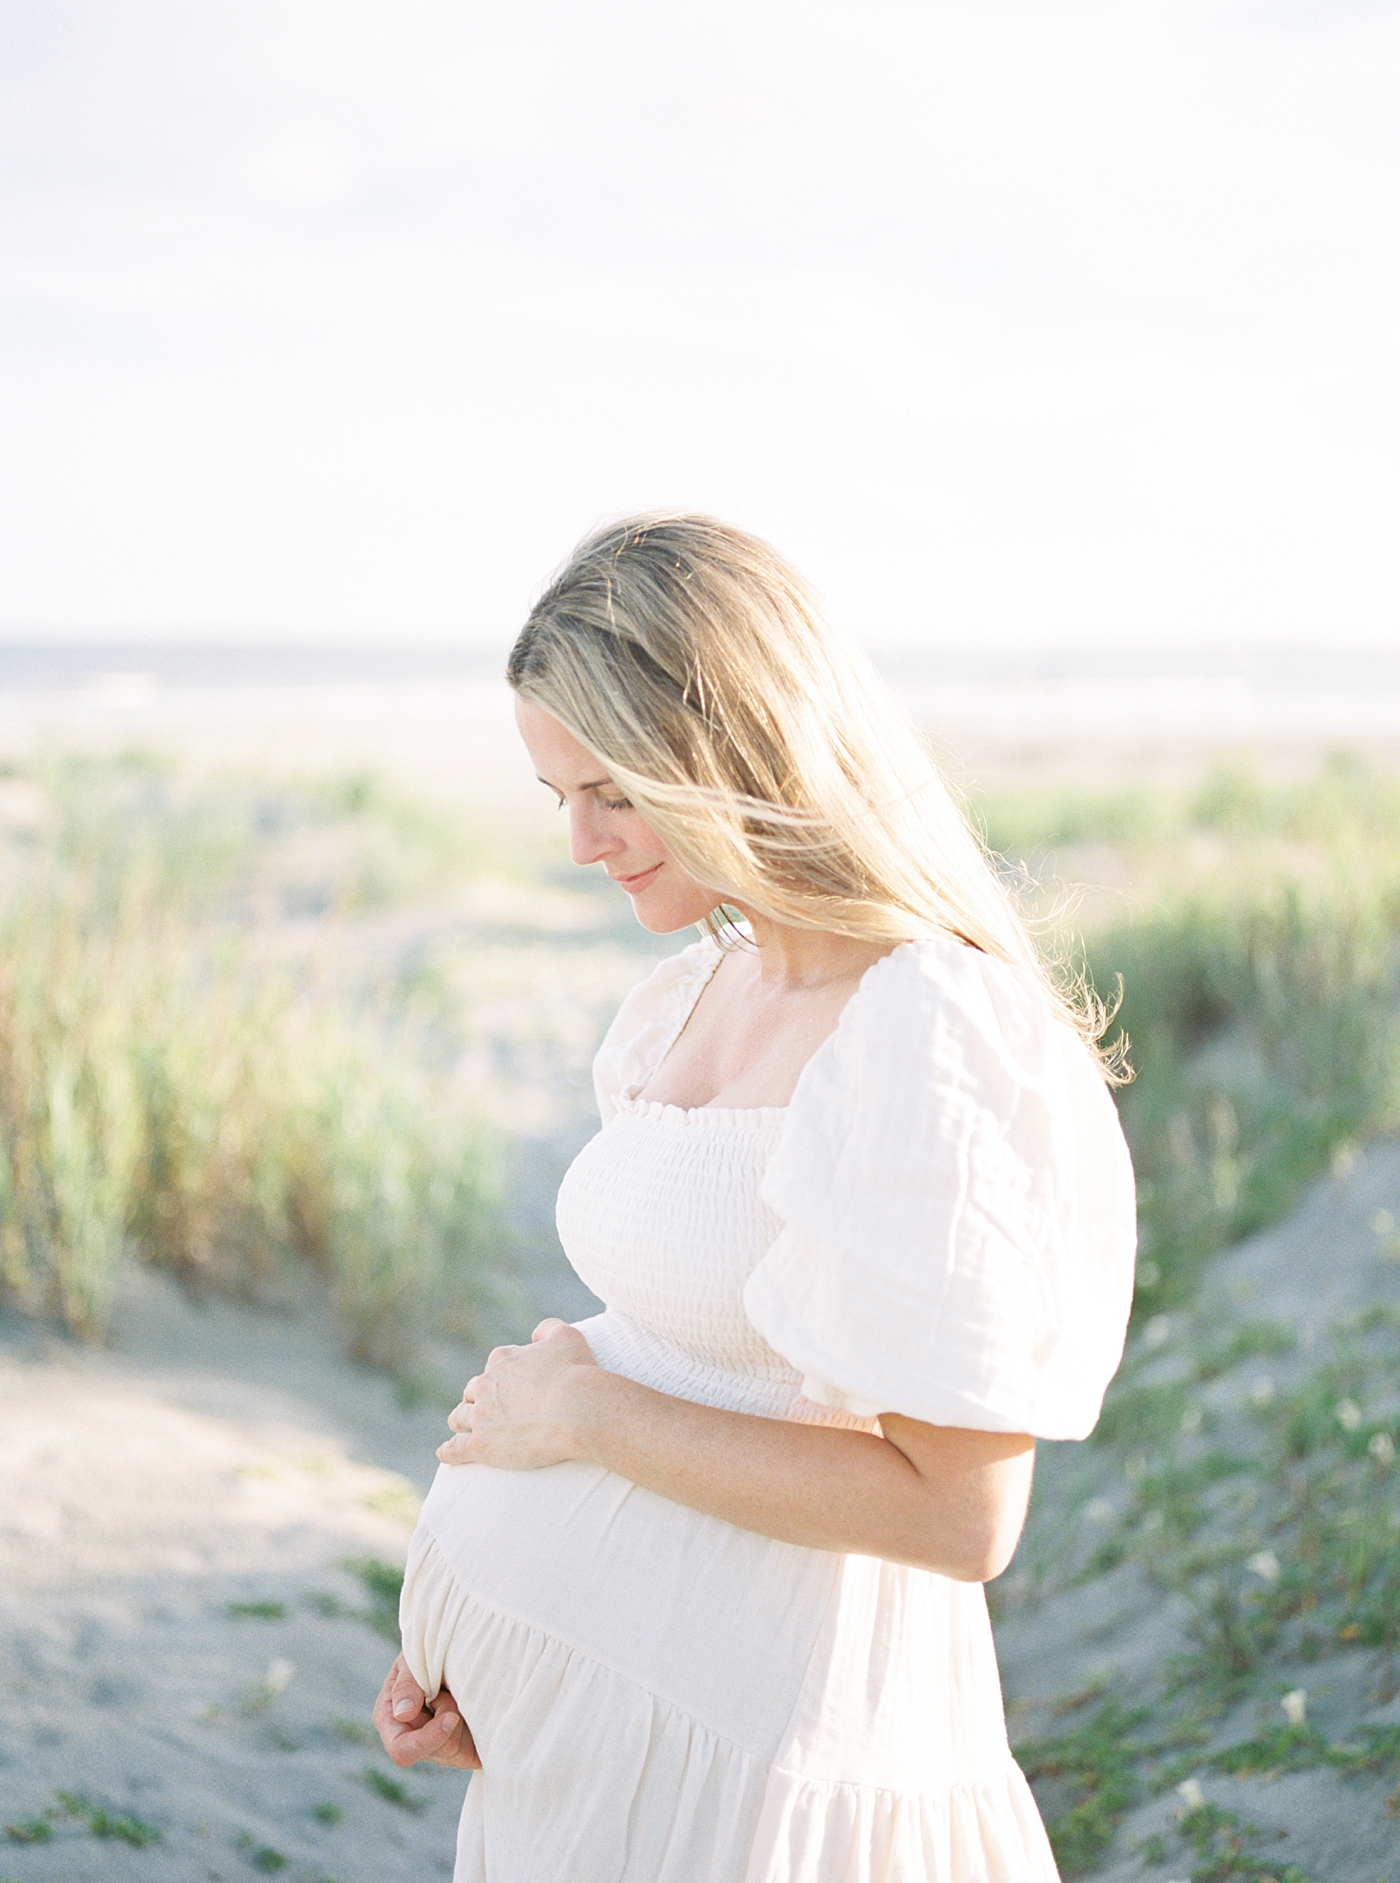 Mom with long blonde hair in a white dress holding her belly on the beach | Image by Caitlyn Motycka